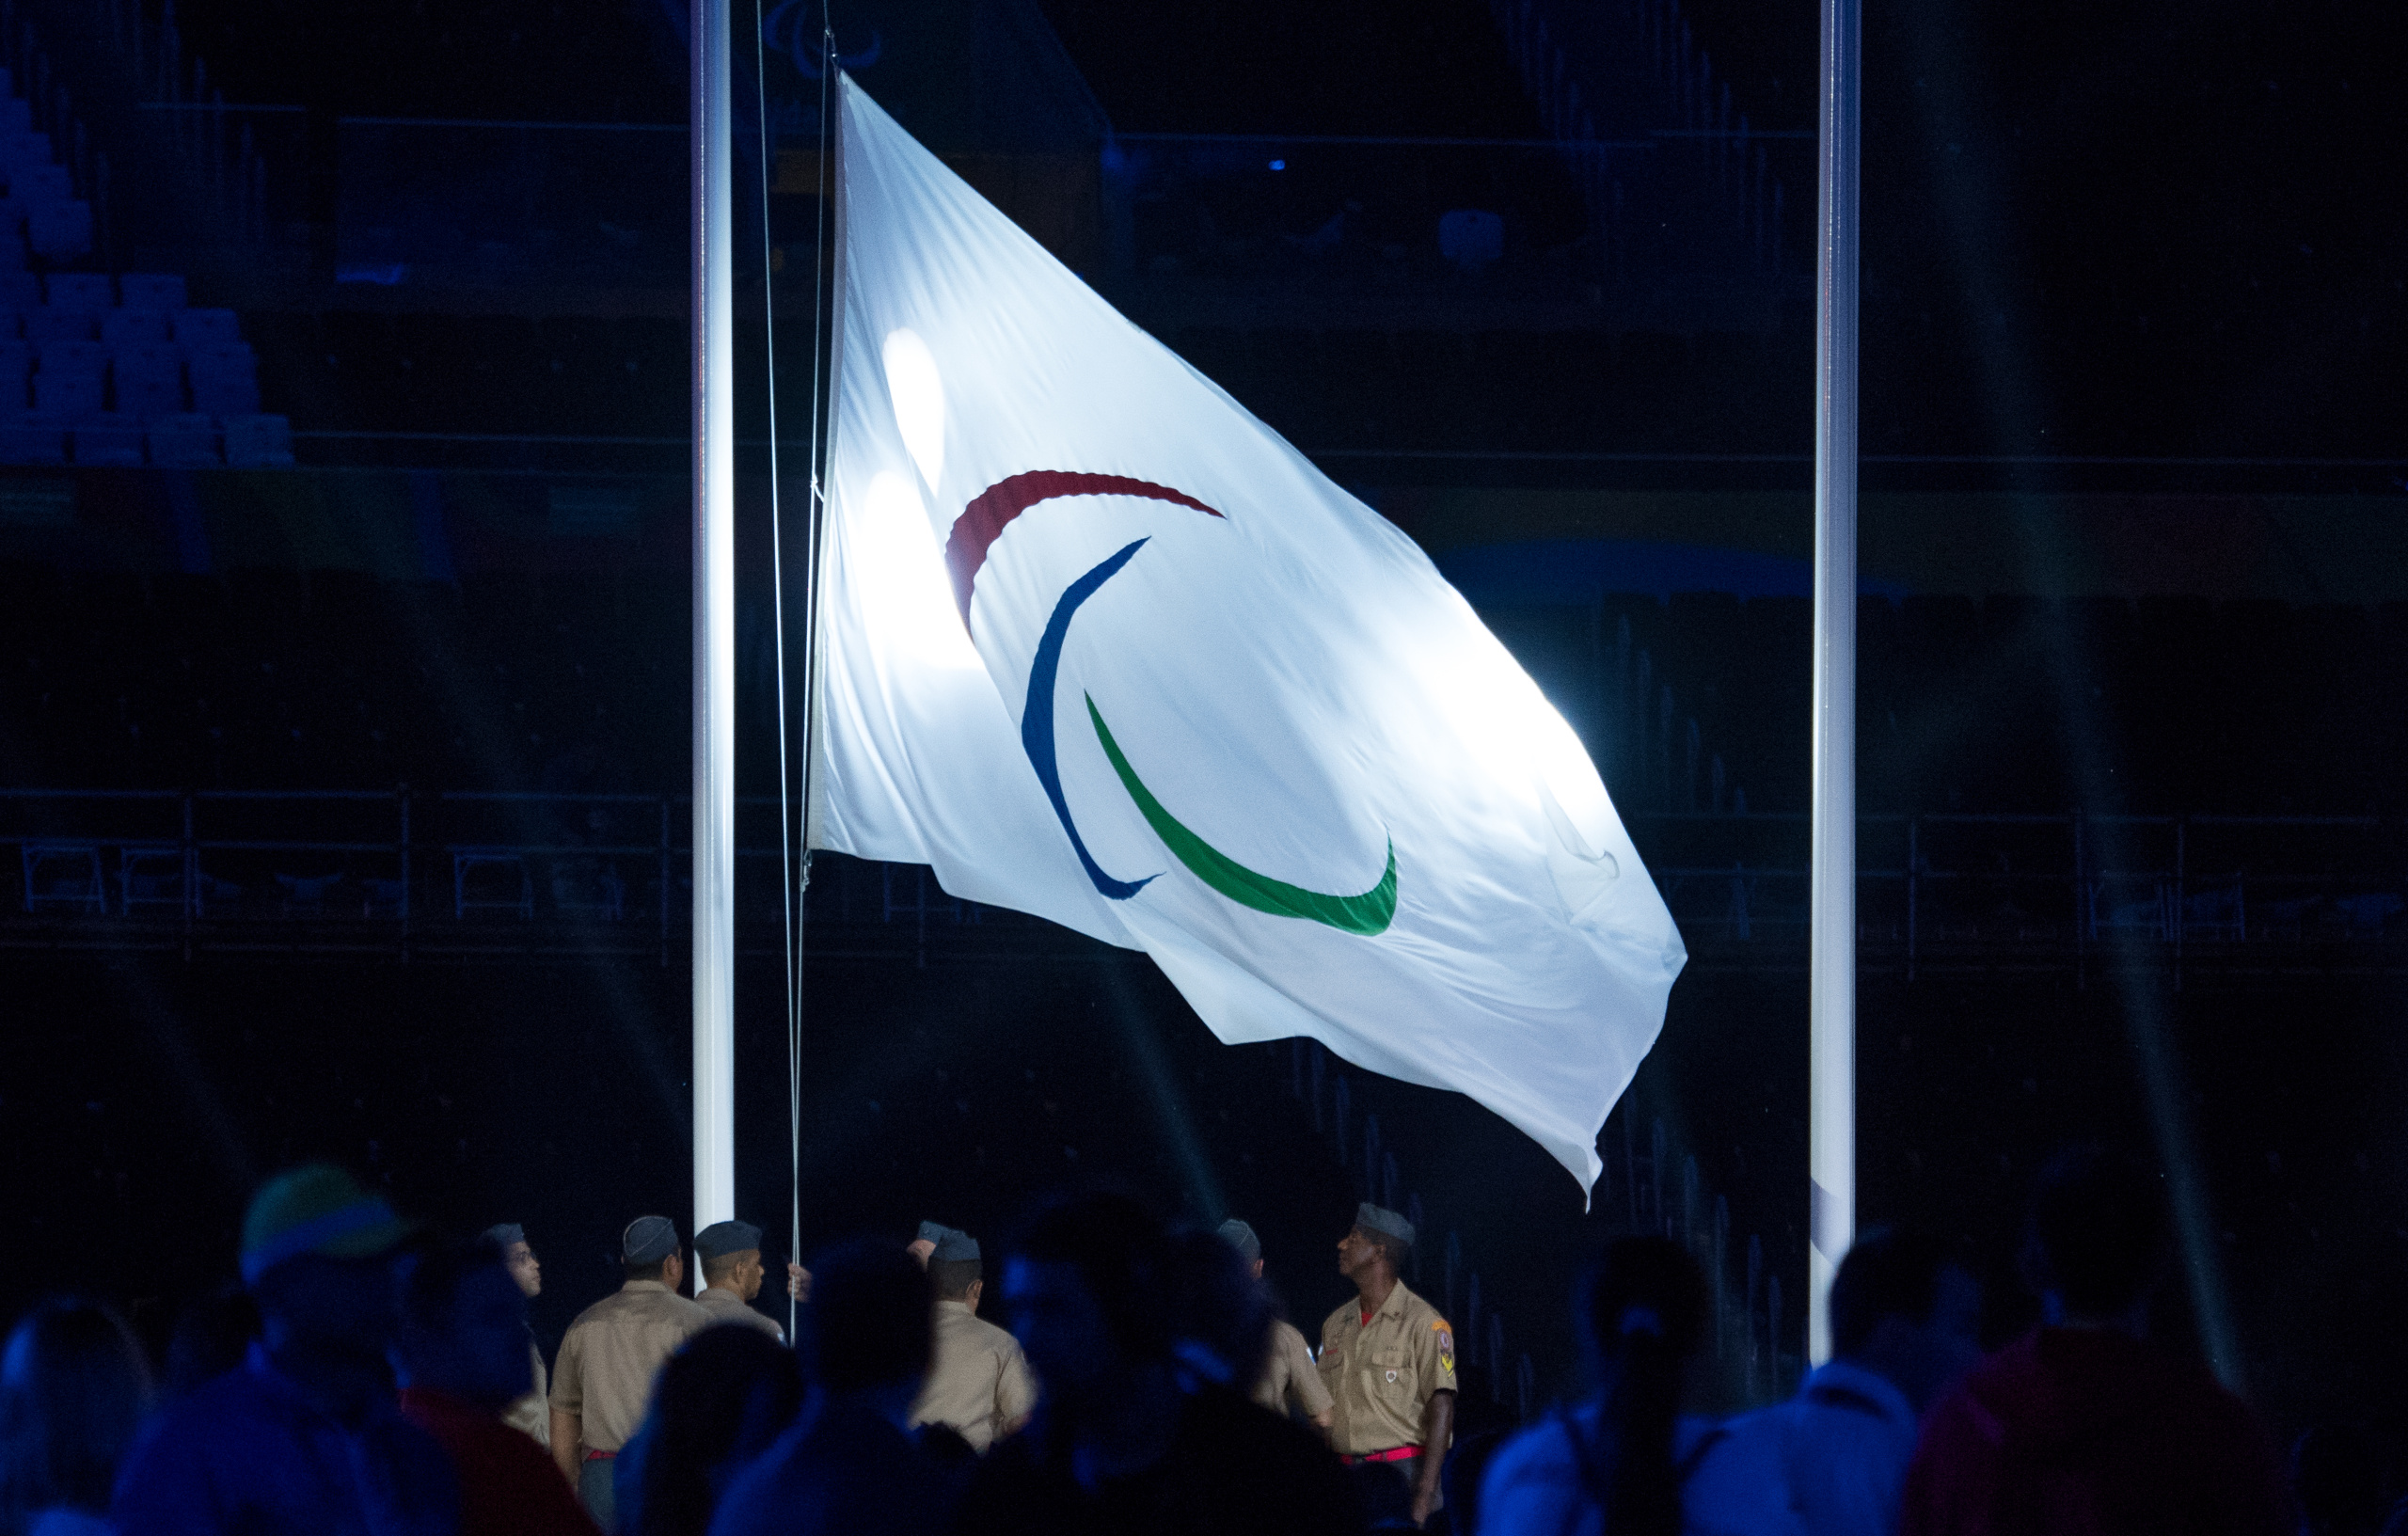 The International Paralympic Committee (IPC)